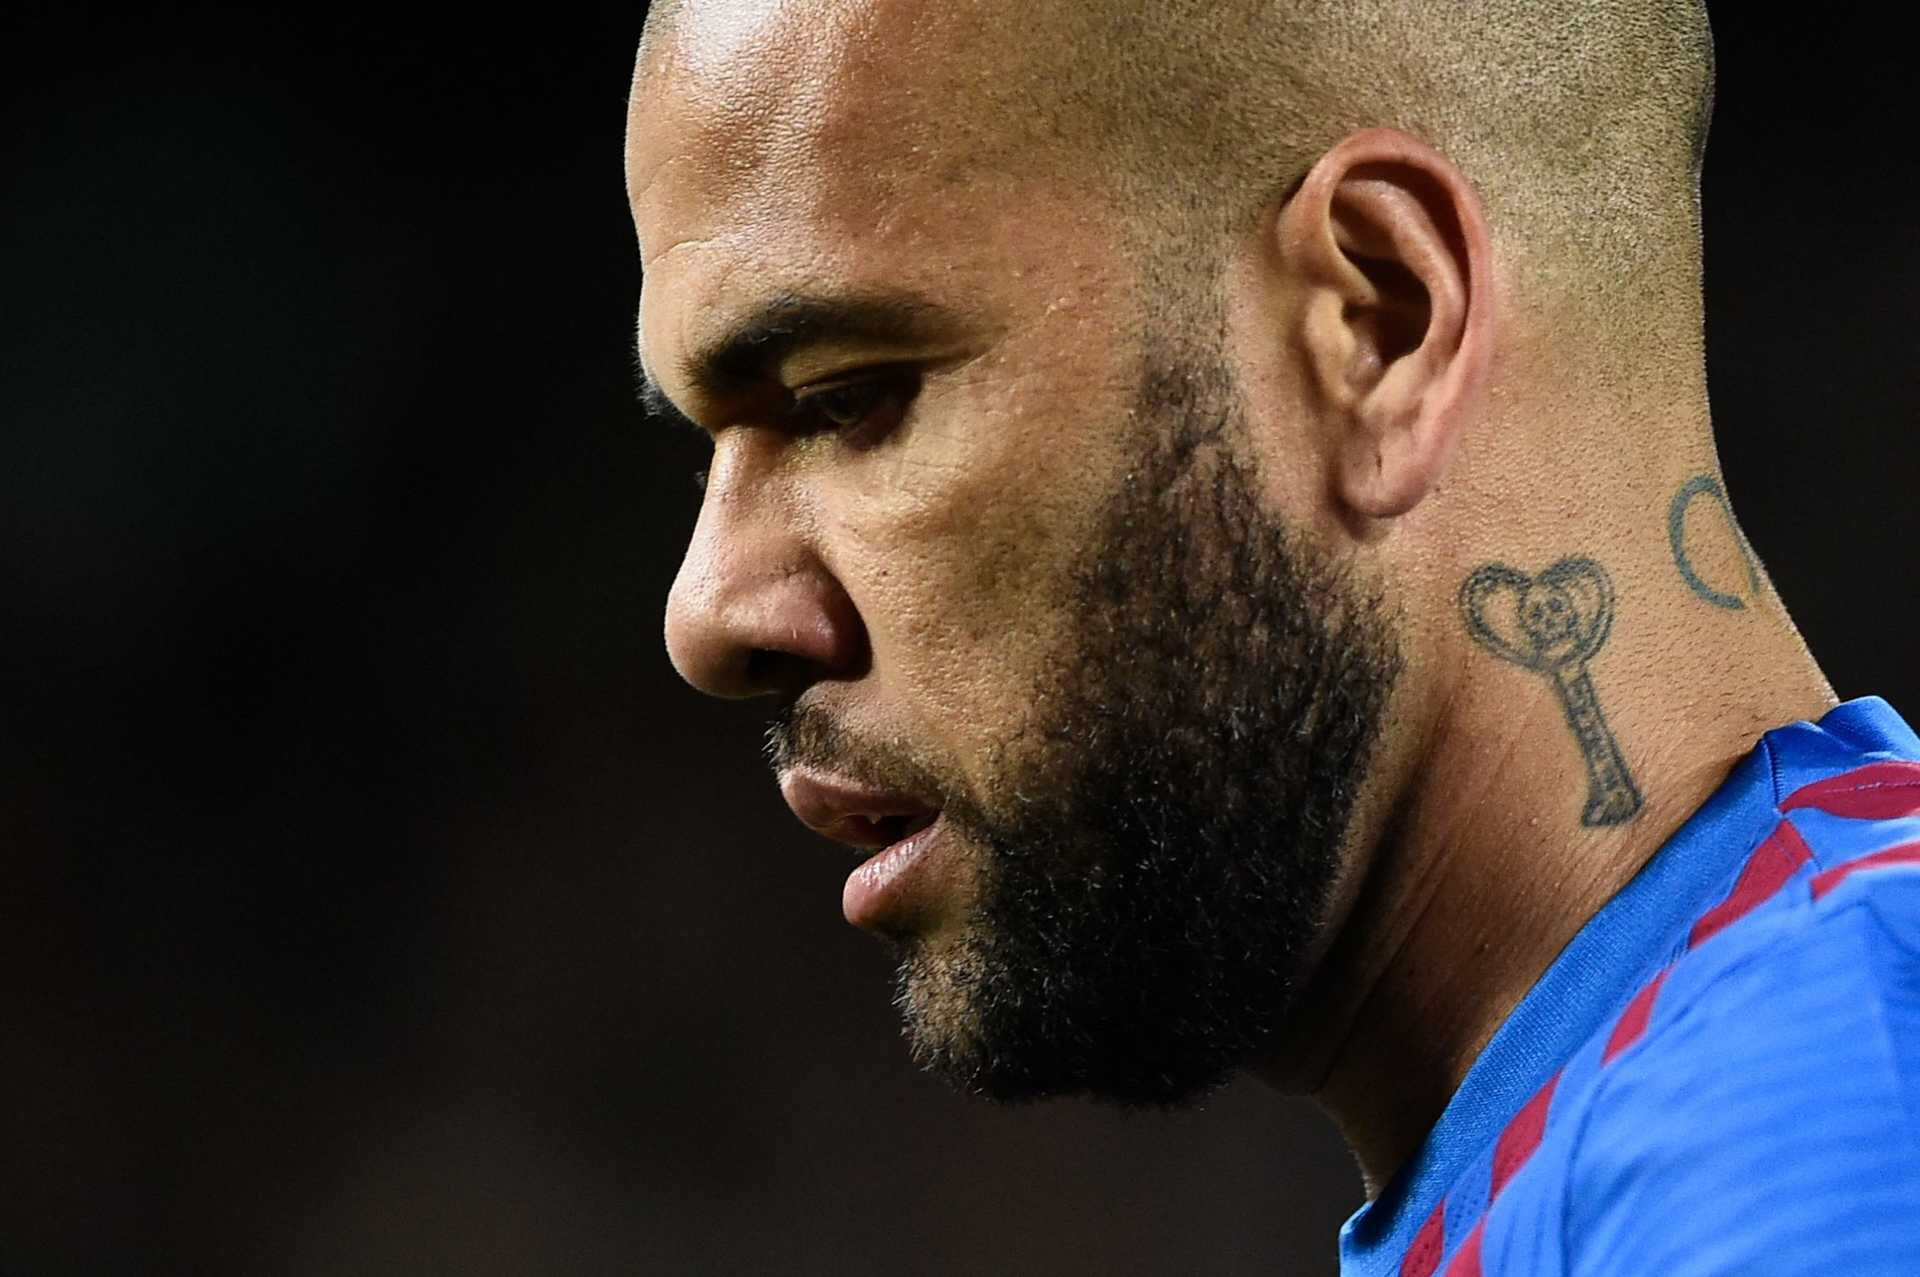 Dani Alves was sentenced to four and a half years in prison for raping a young girl